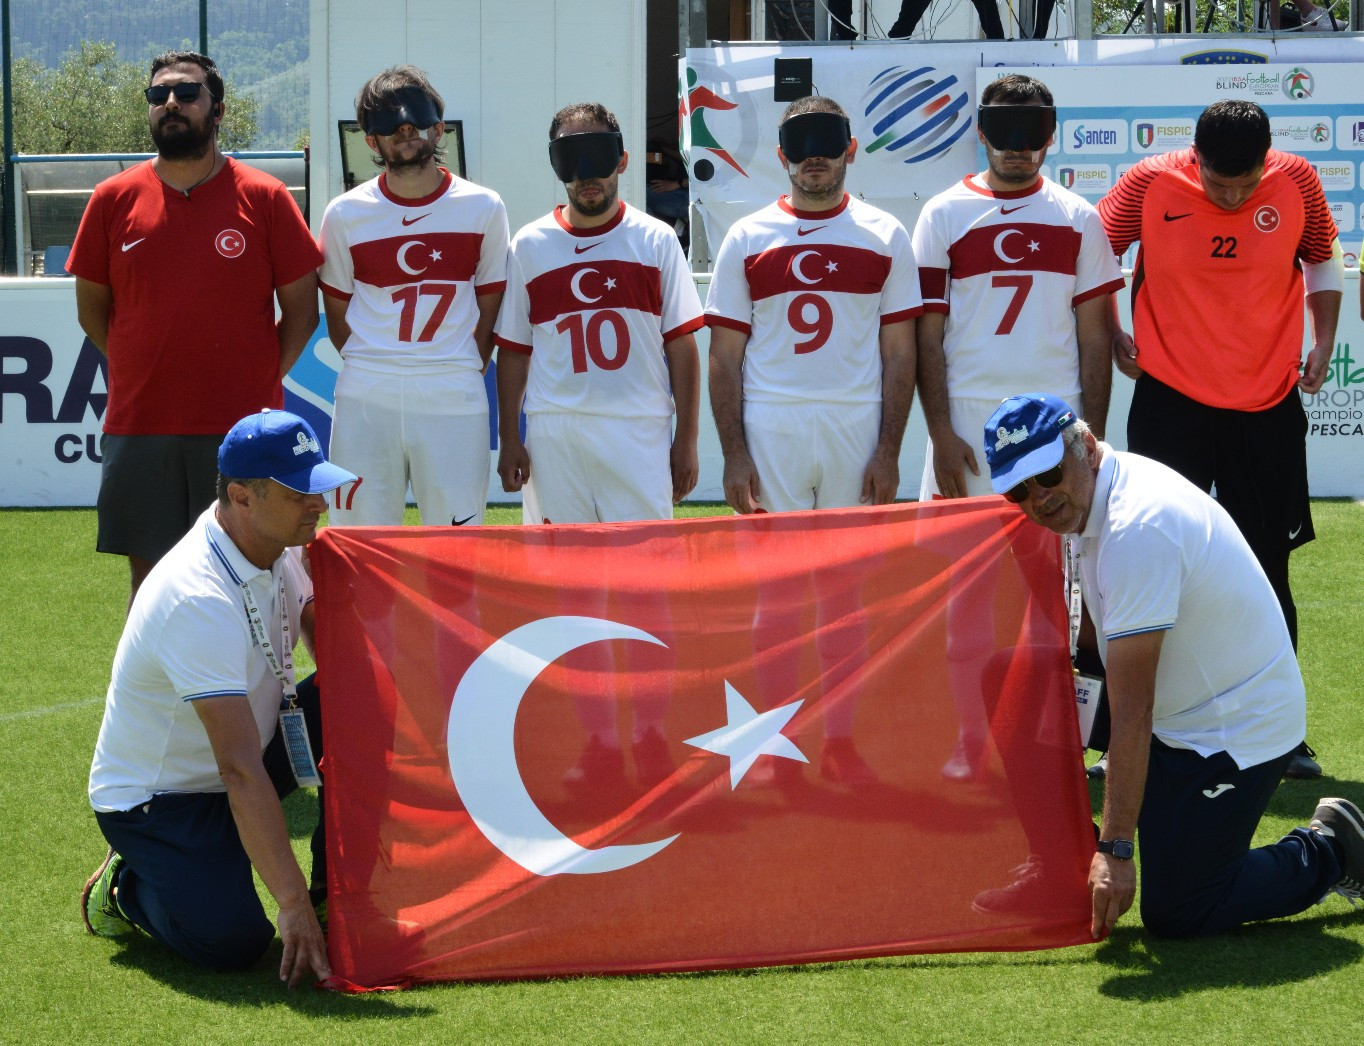 Turkey confirmed their place at Paris 2024 after reaching the final in Pescara ©IBSA